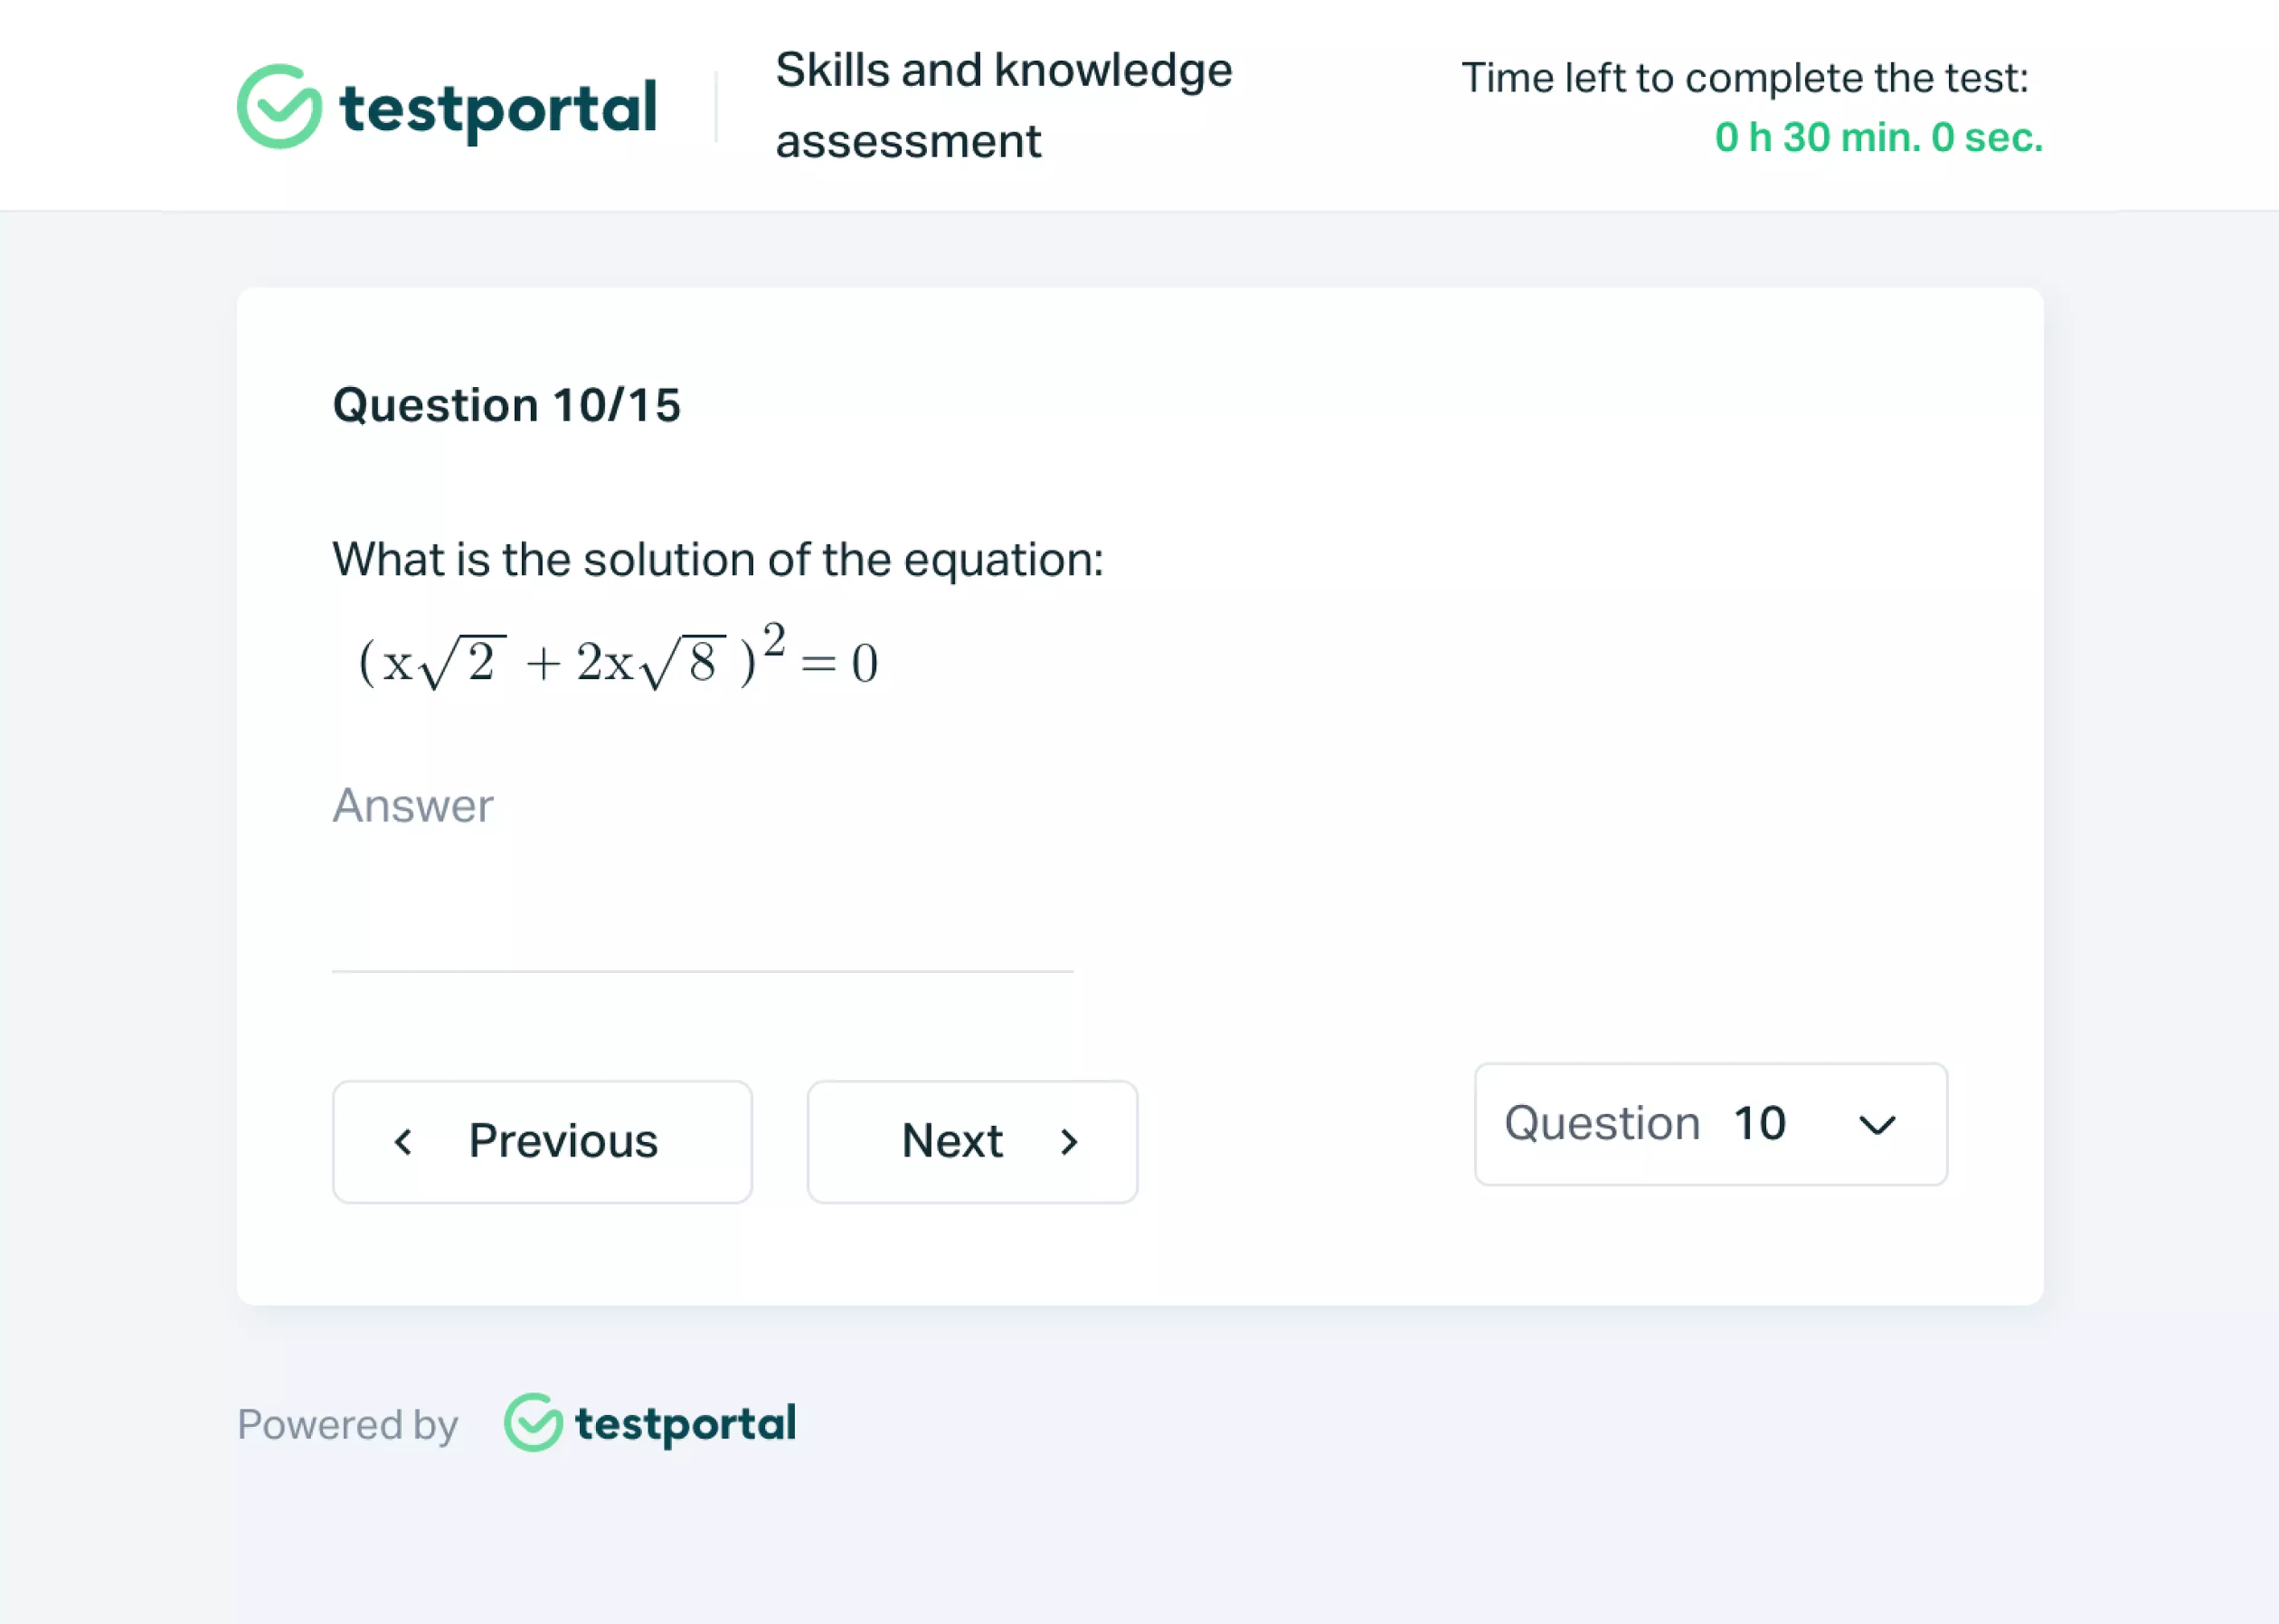 Testportal online test question with a mathematical equation.